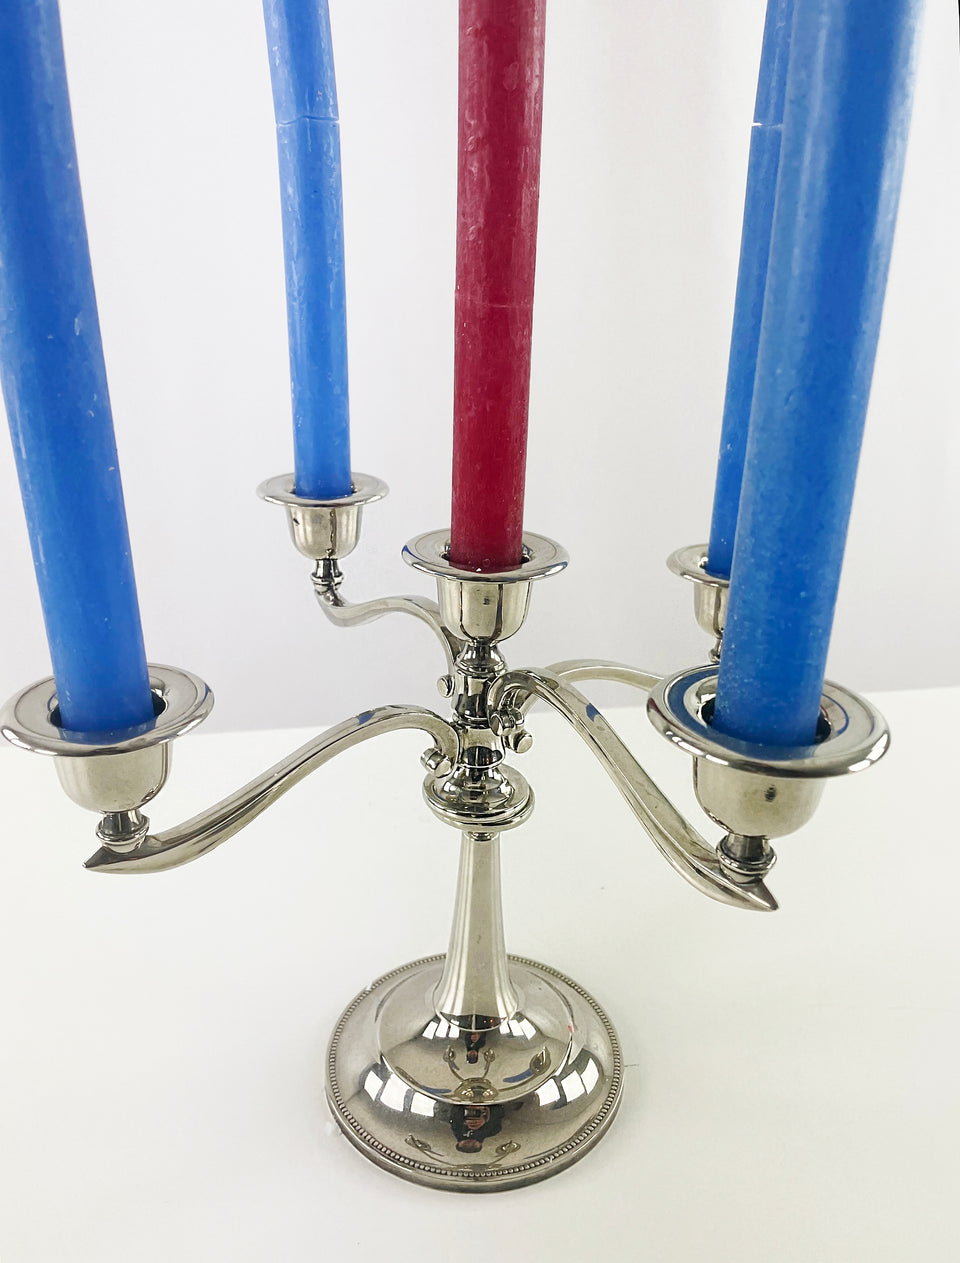 Antique Silver Plated Candelabra